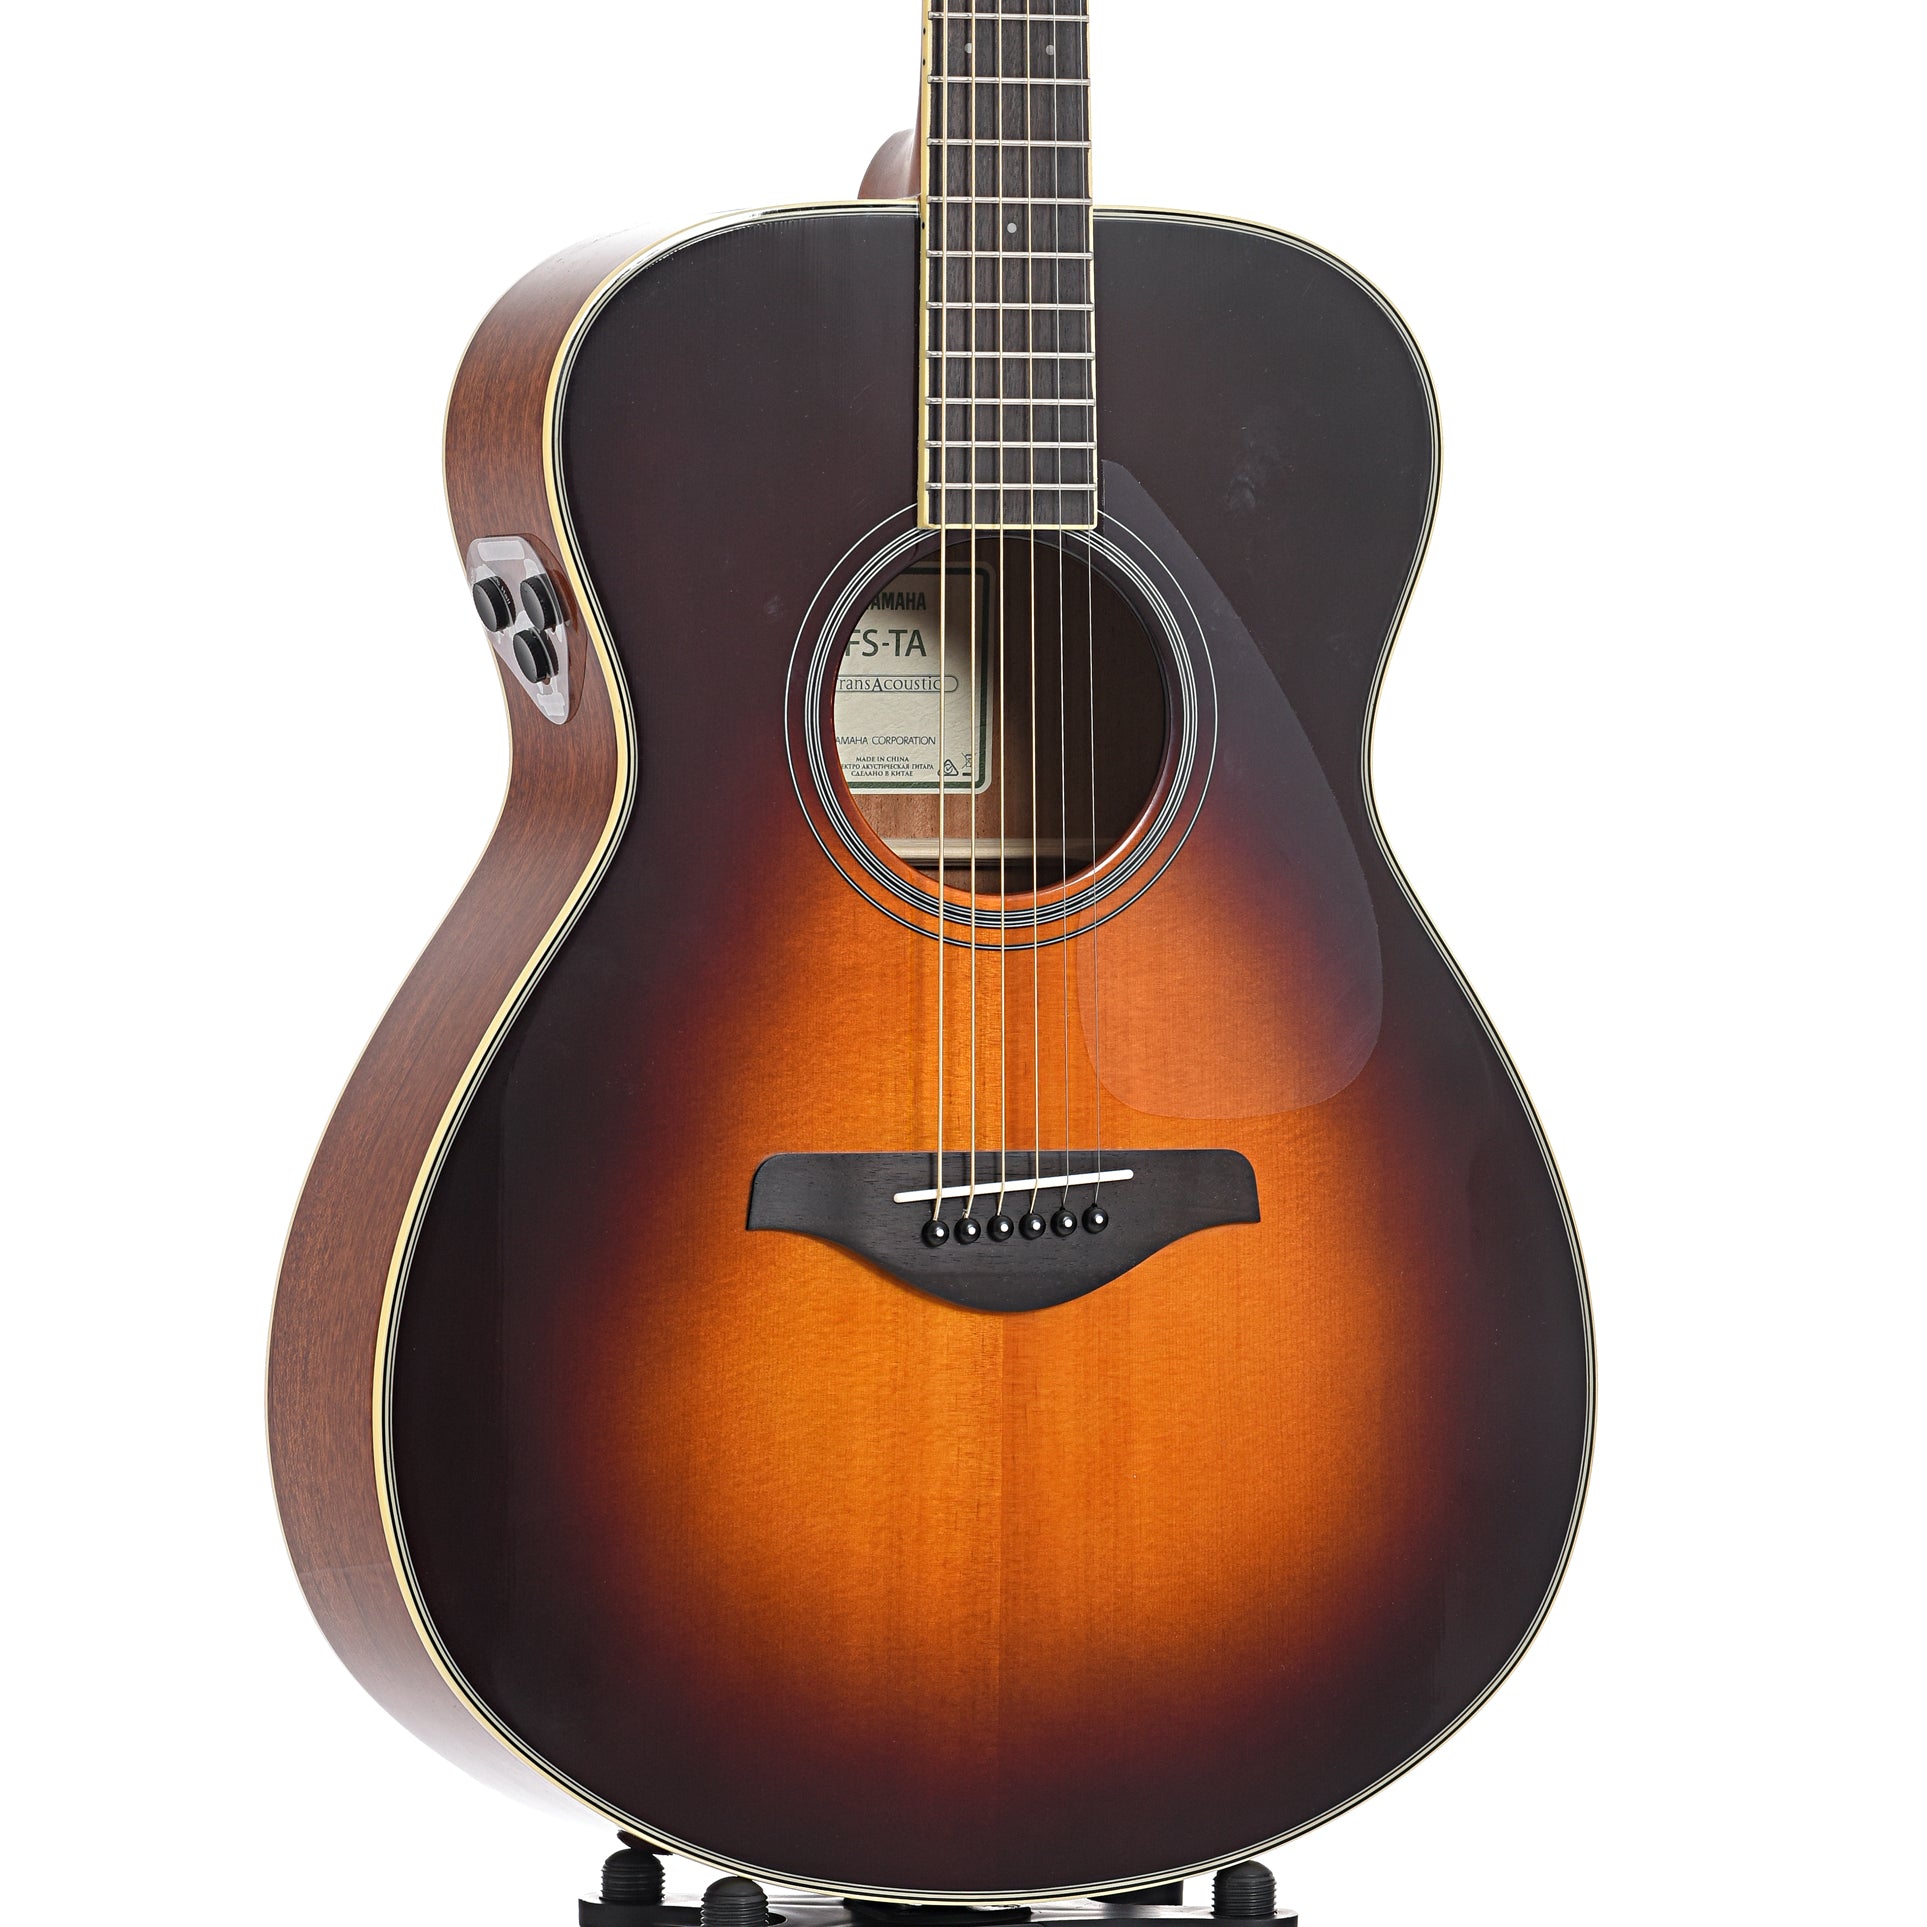 Front and side of Yamaha FS-TA Brown Sunburst TransAcoustic 